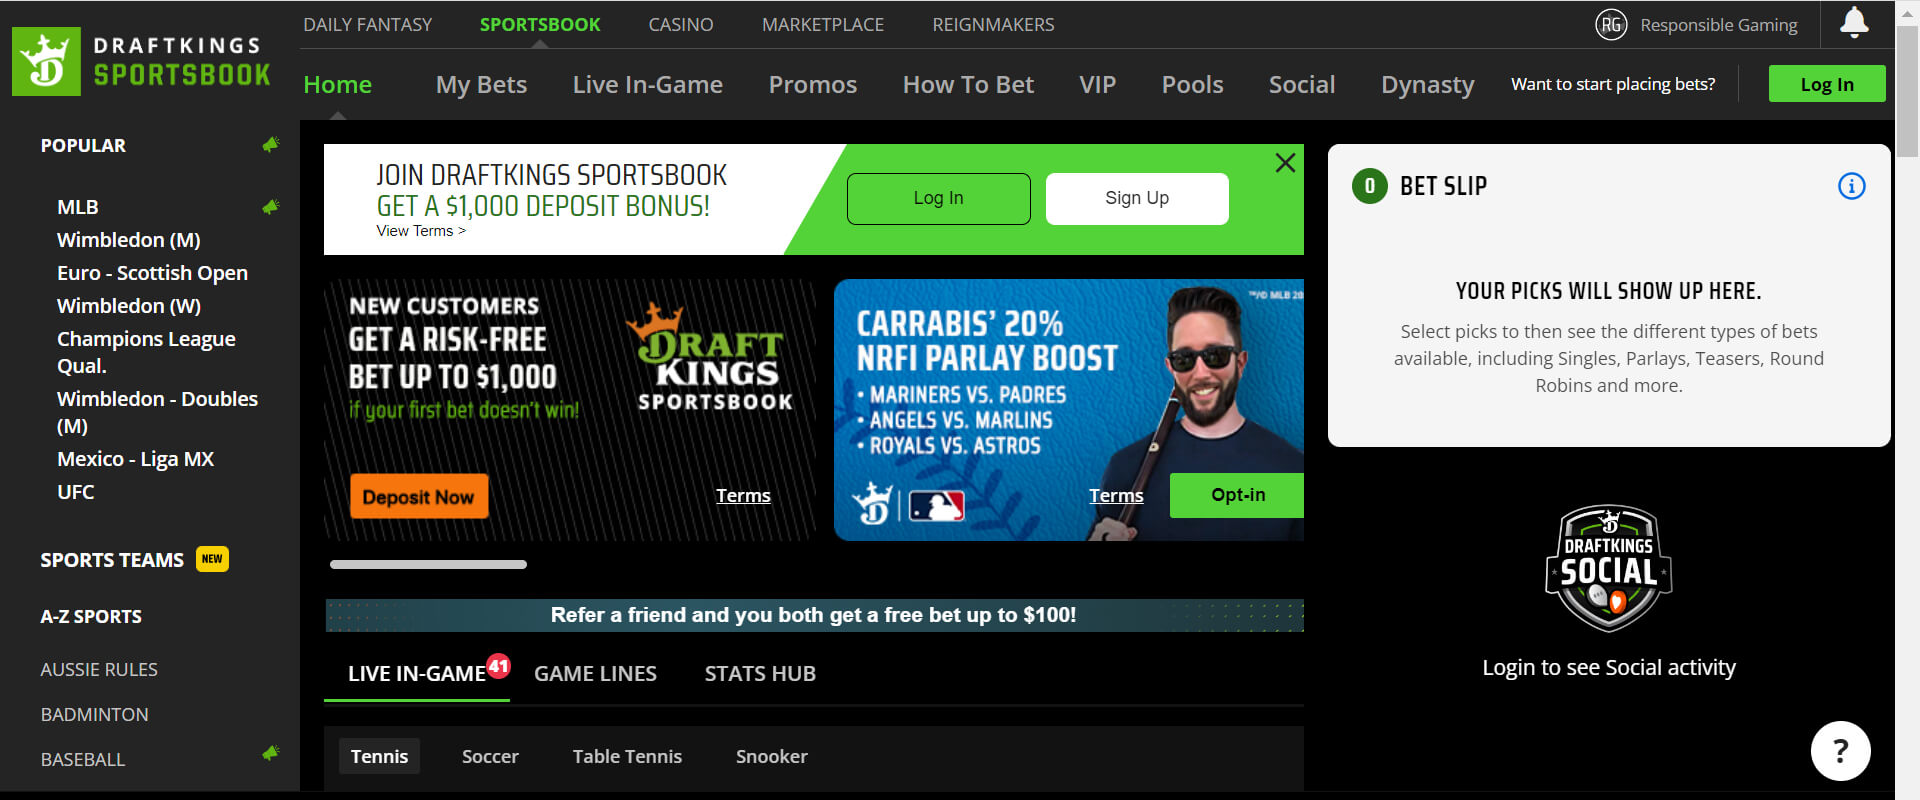 Picture of DraftKings website